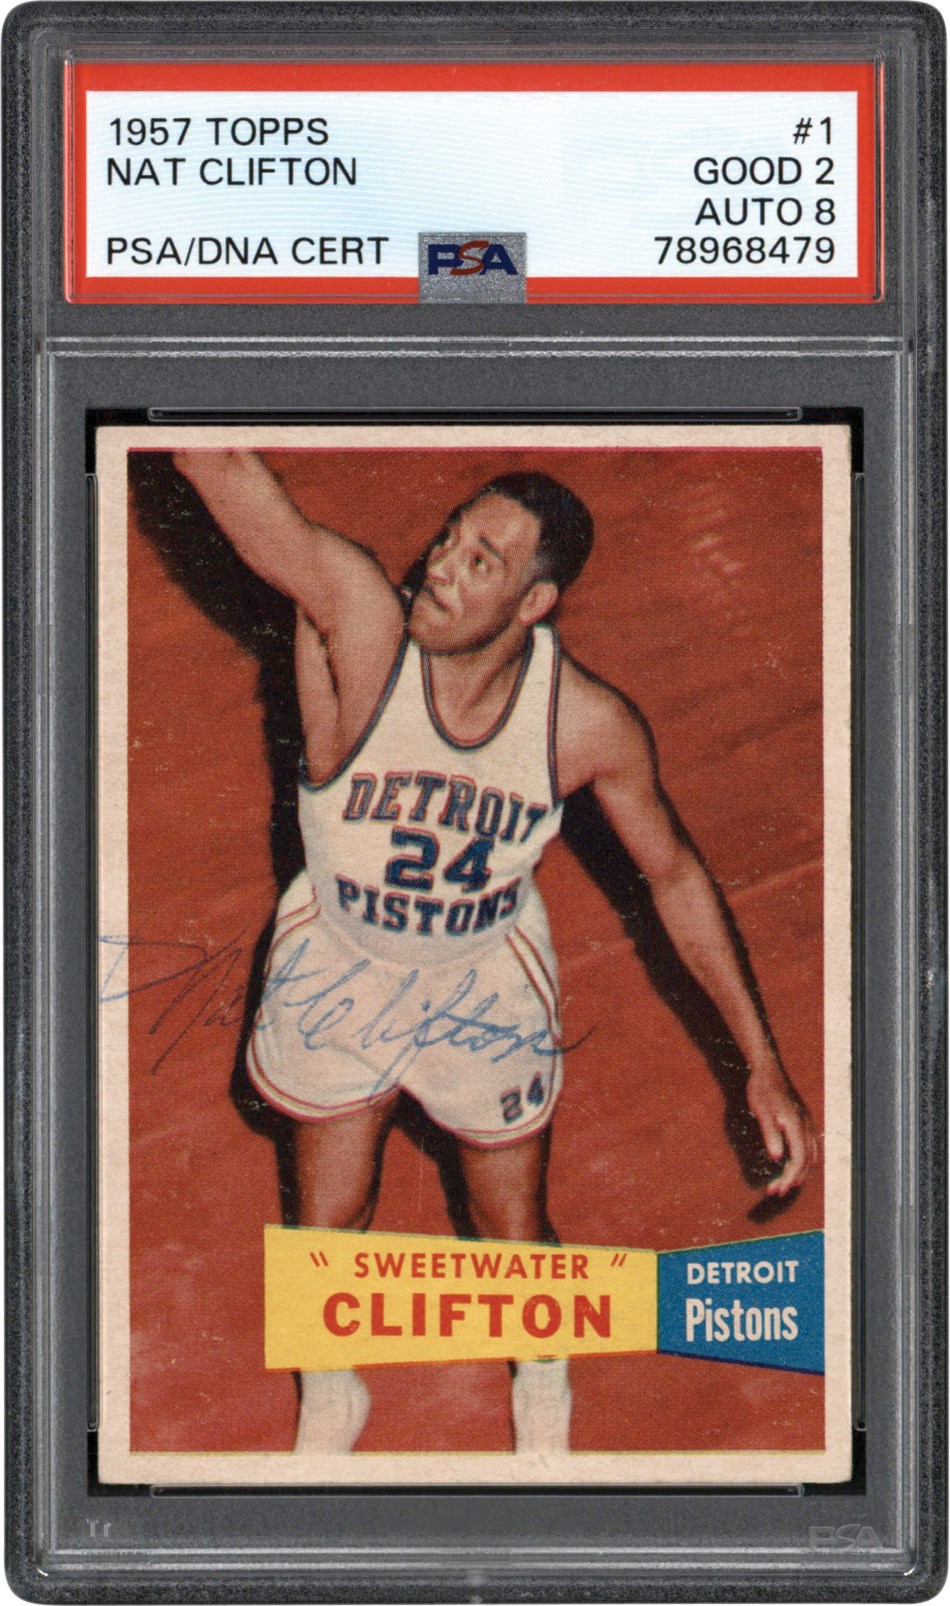 1957 Topps Basketball #1 Nat "Sweetwater" Clifton Signed Card PSA GD 2 Auto 8 (Only Dual-Graded PSA Example)